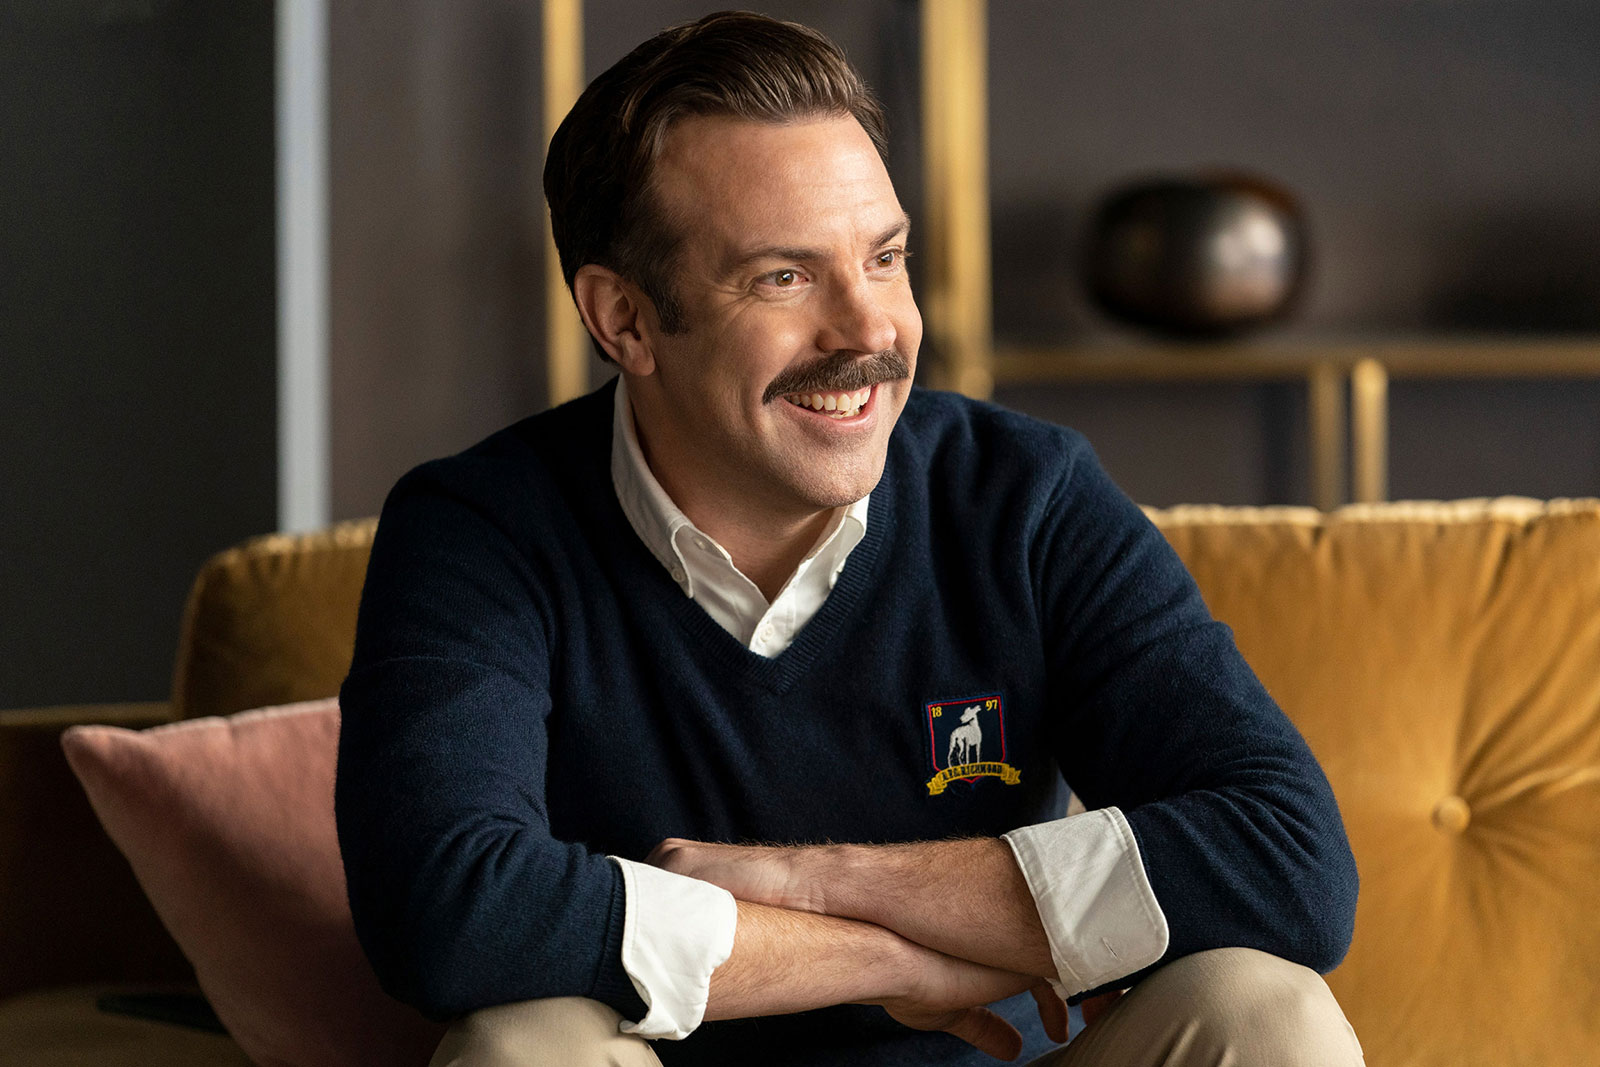 Jason Sudeikis in "Ted Lasso"